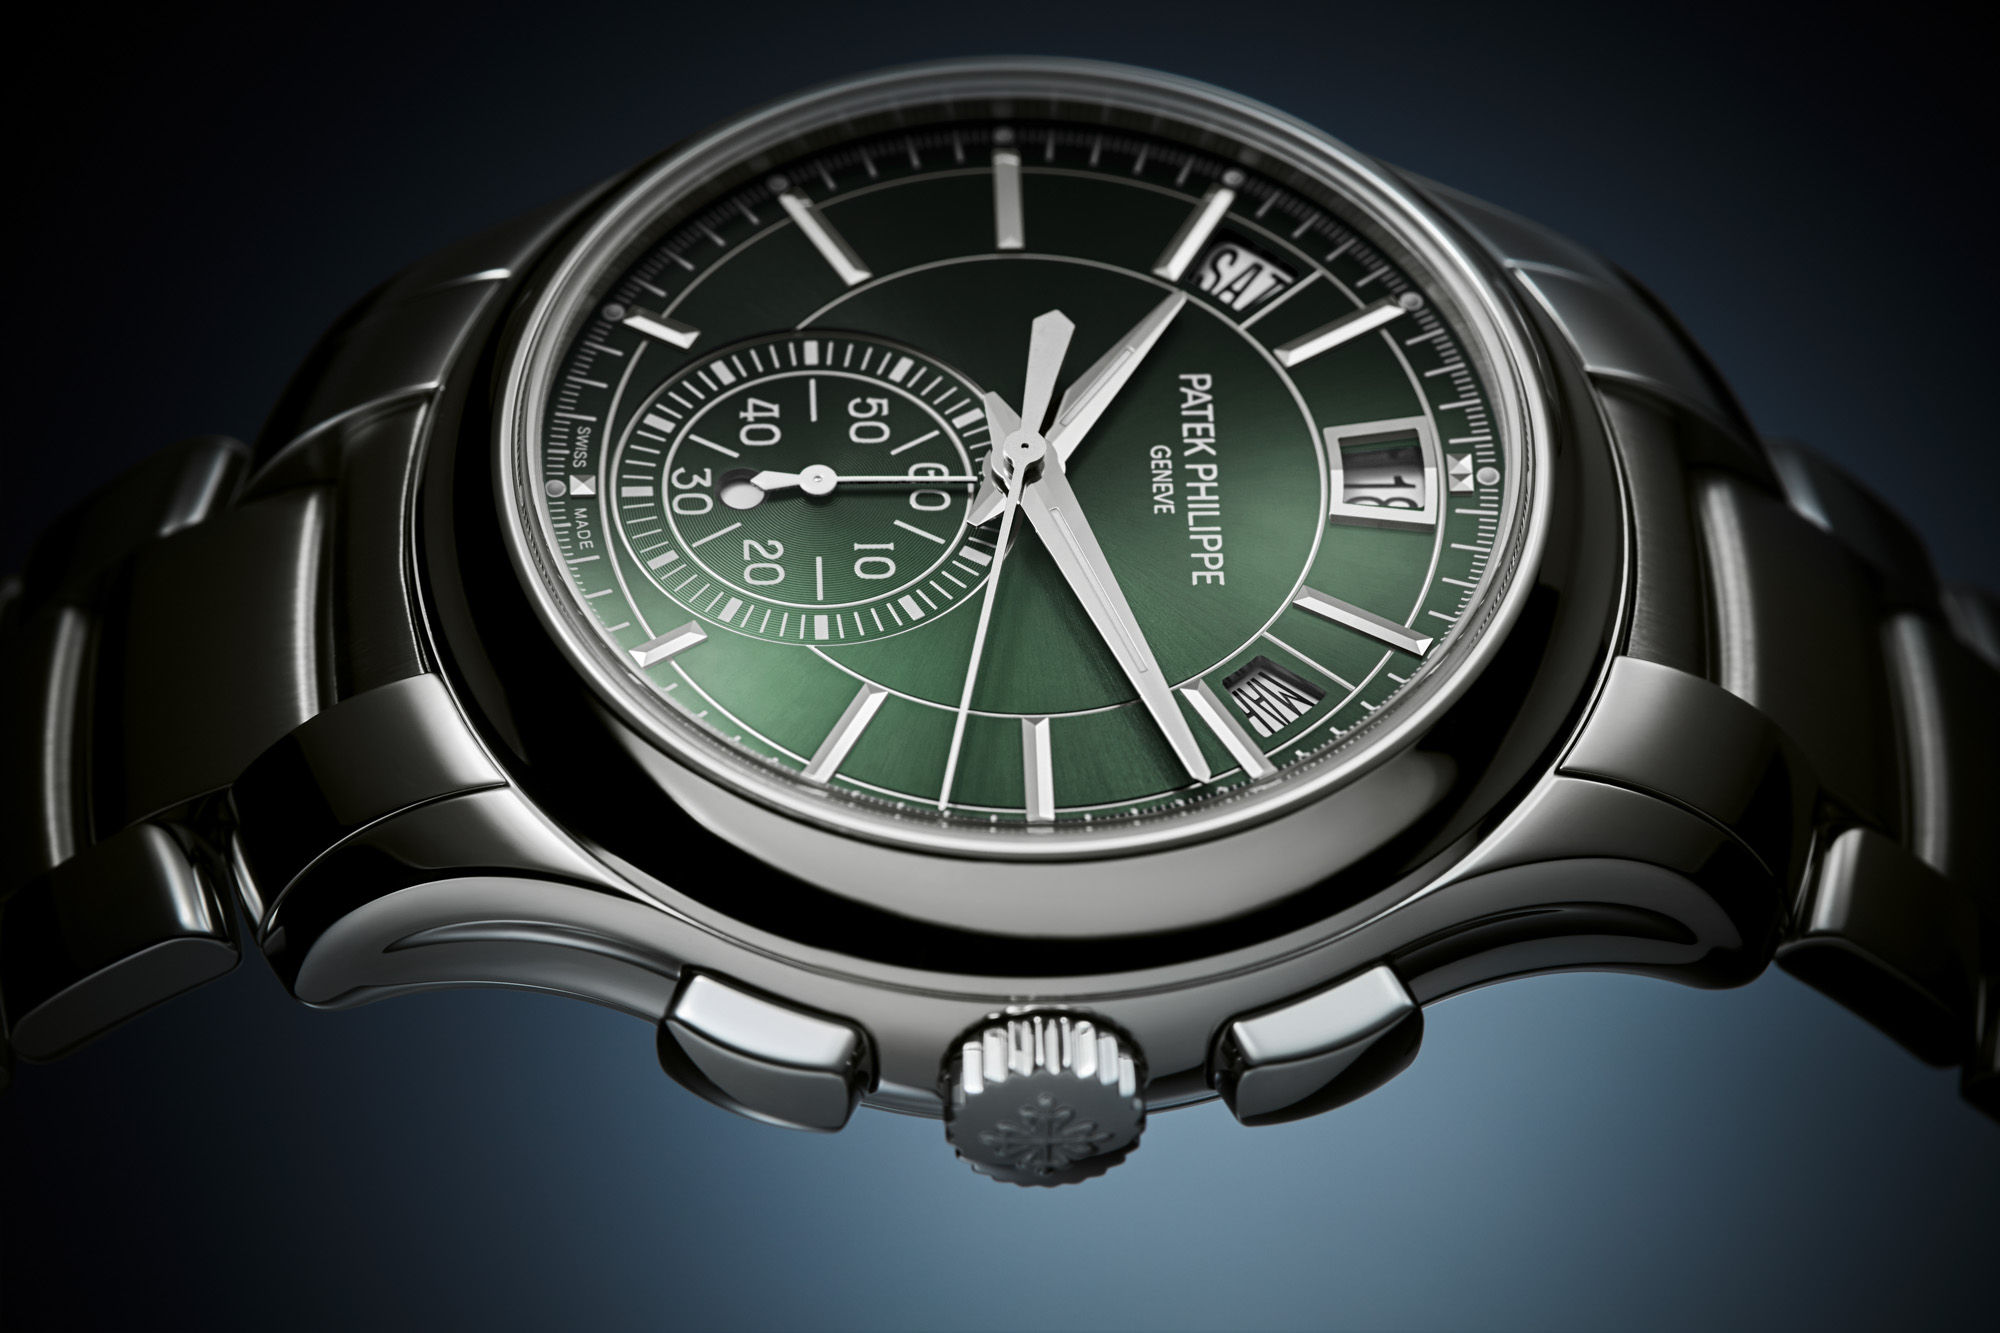 Patek Philippe introduces gorgeous green watches for 2022